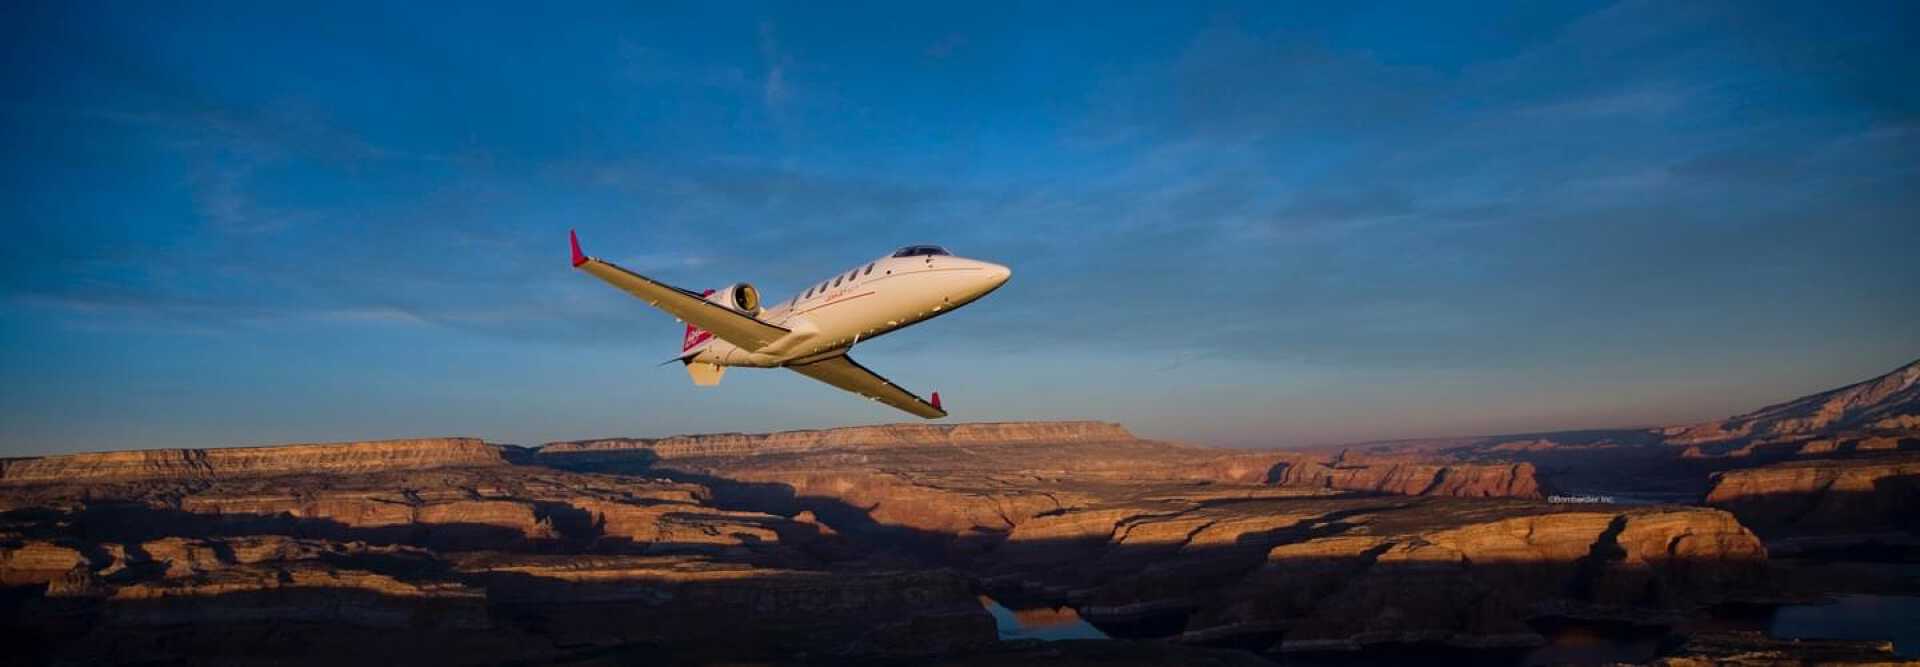 Midsize Jet Bombardier Learjet 60XR to charter for private air travel with Lunajets, medium-haul trip,comfort and technology, direct route